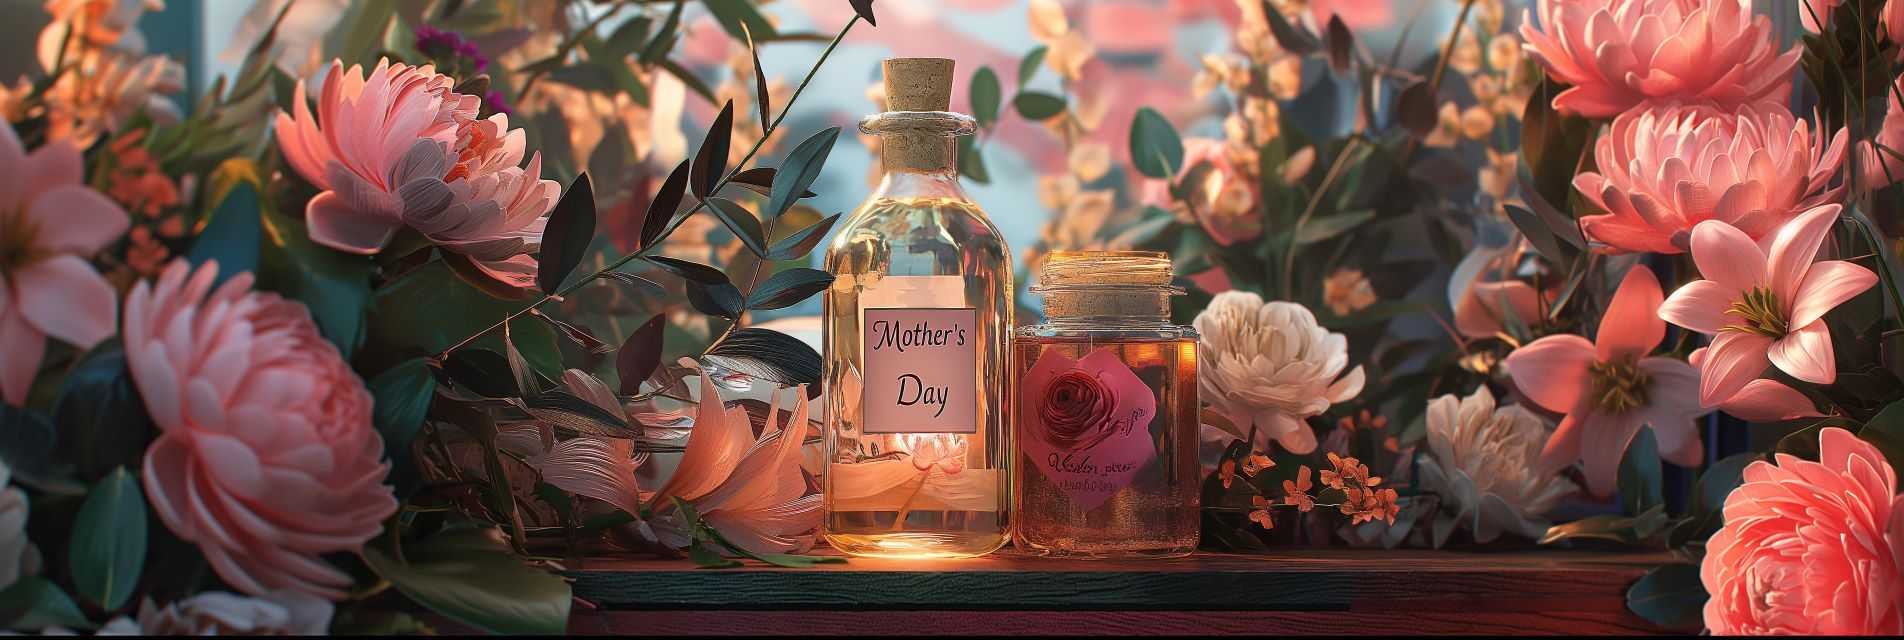 alt_header_Mother's Day - A tribute to her